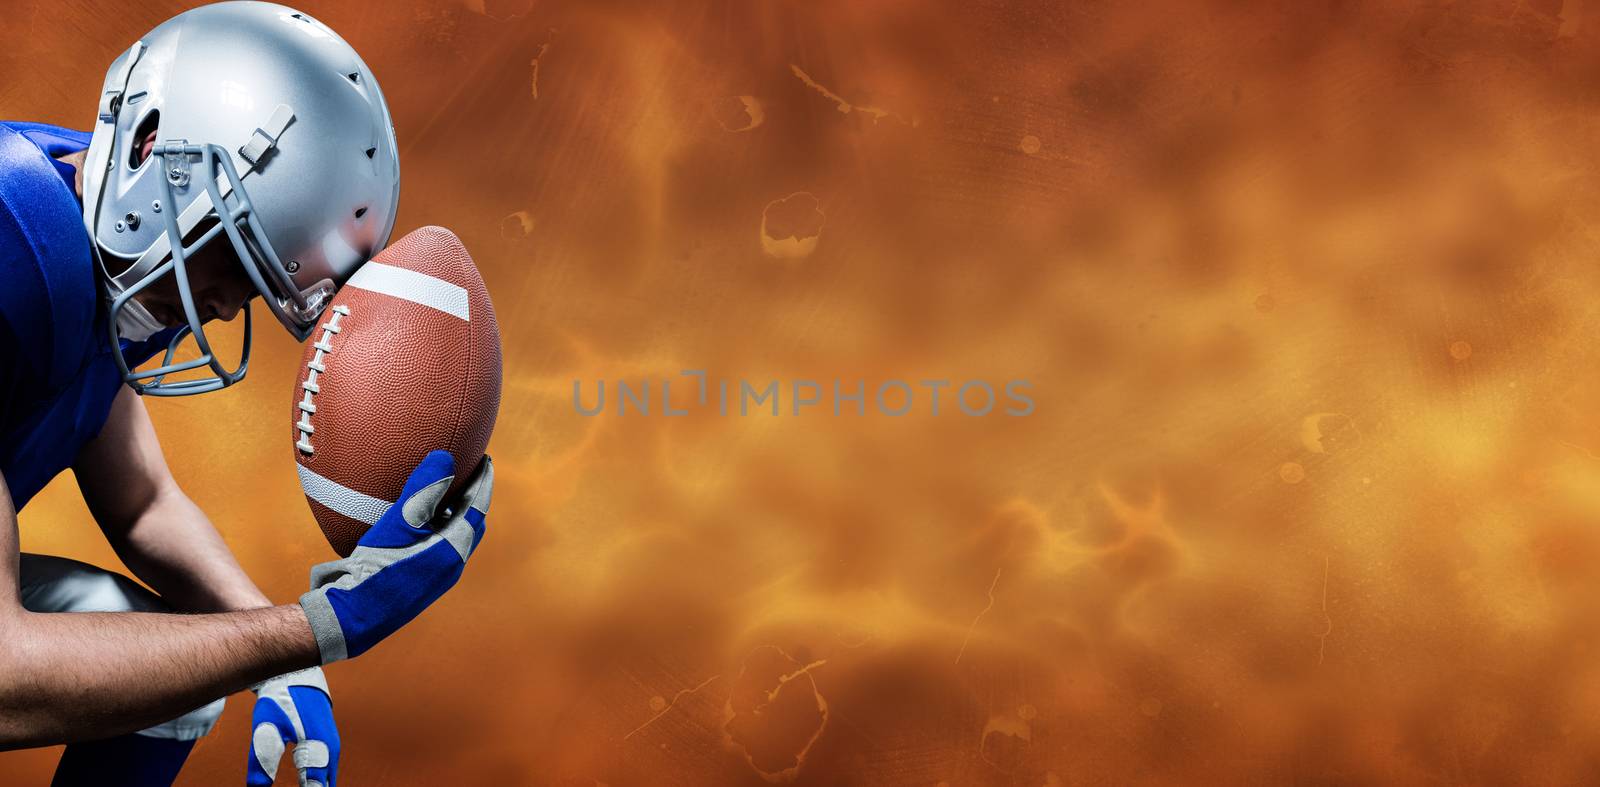 Close-up of upset American football player with ball against orange background